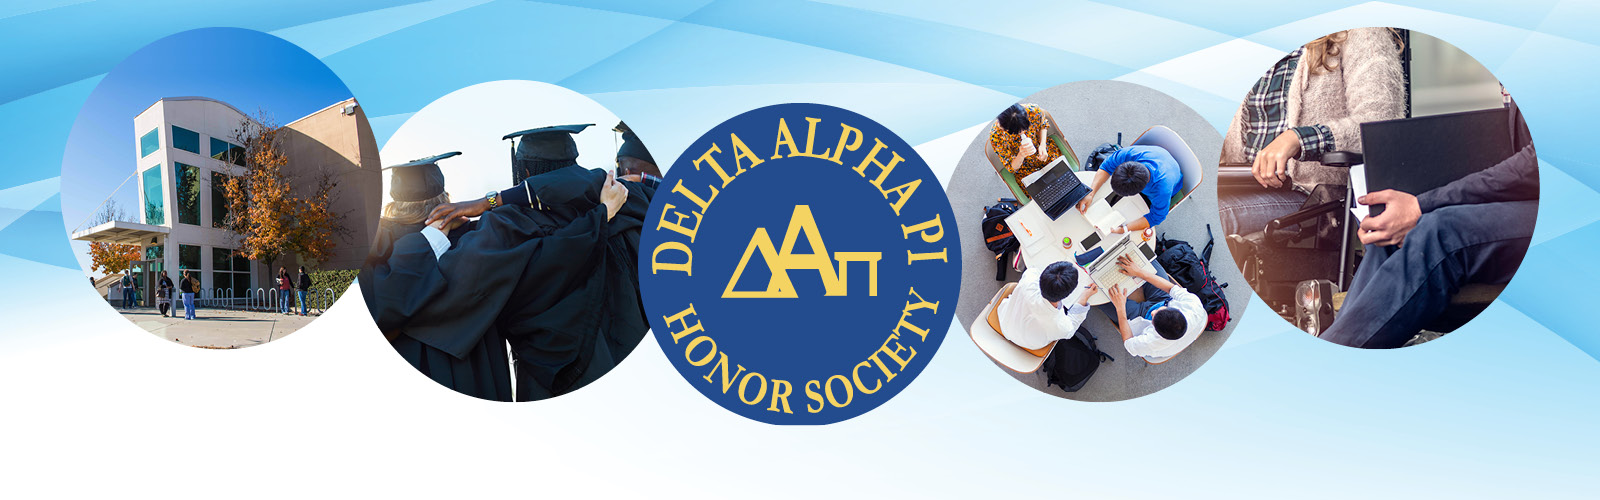 Students at Clovis Community College and the Delta, Alpha, Pi, Honors Society logo